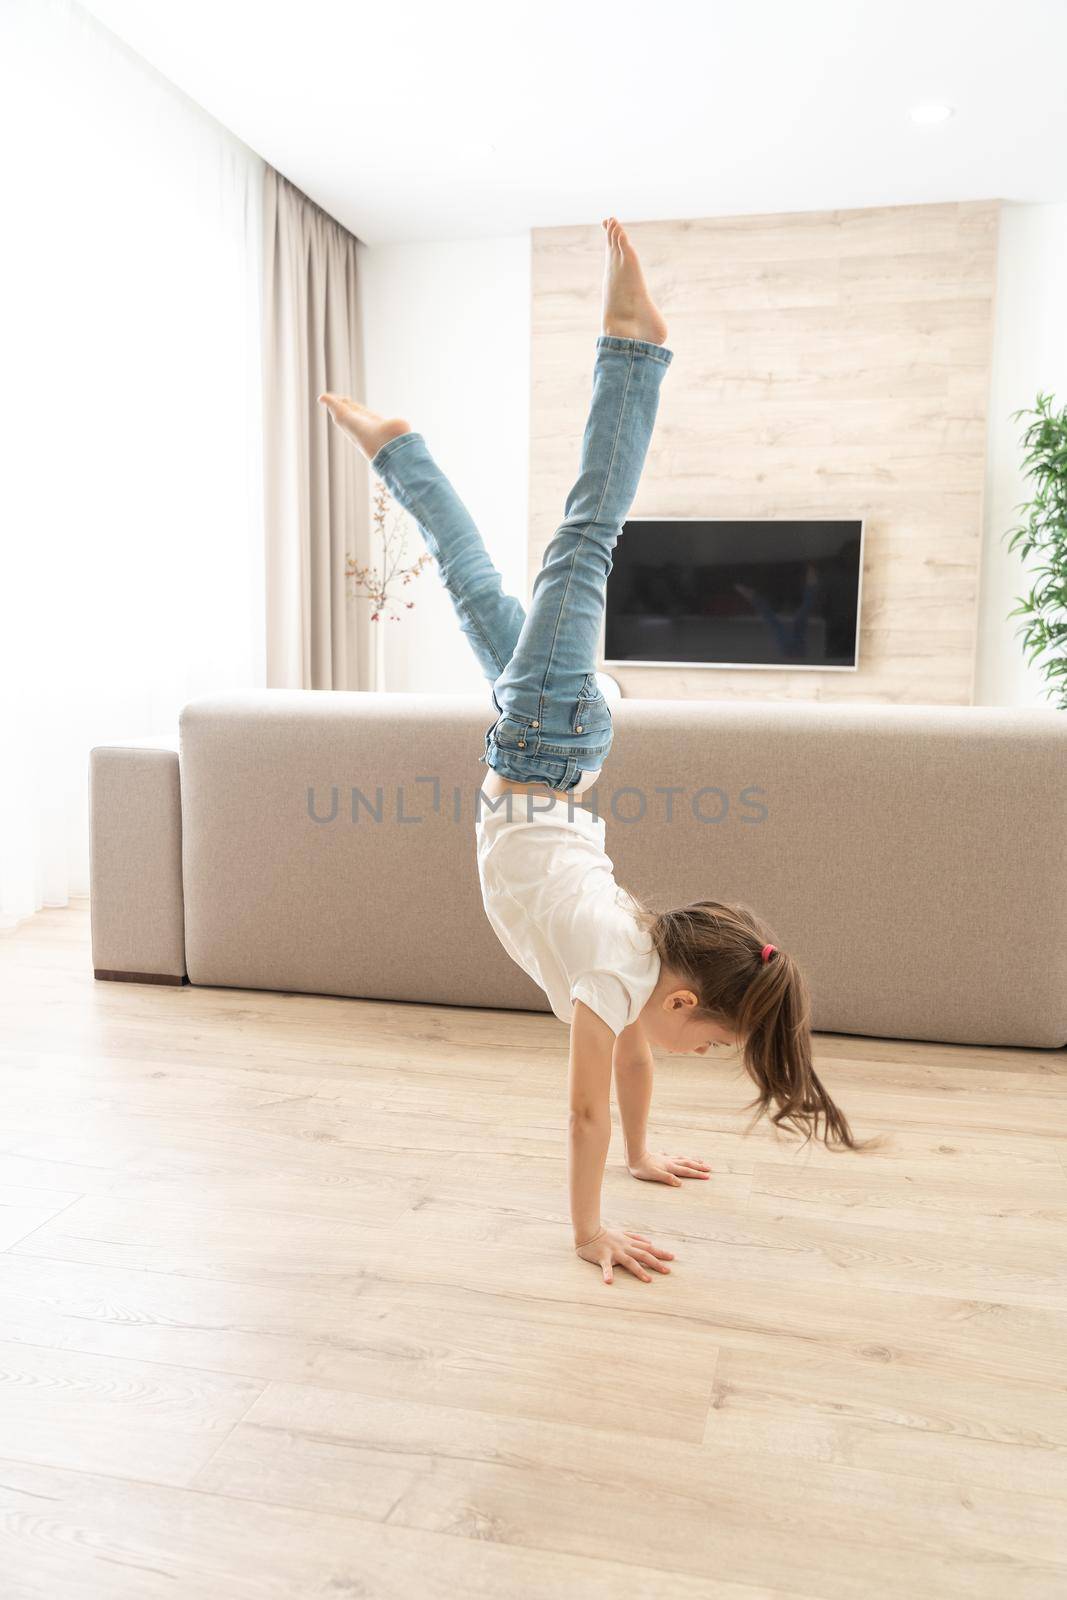 Girl walking upside down on her arms at home by Mariakray